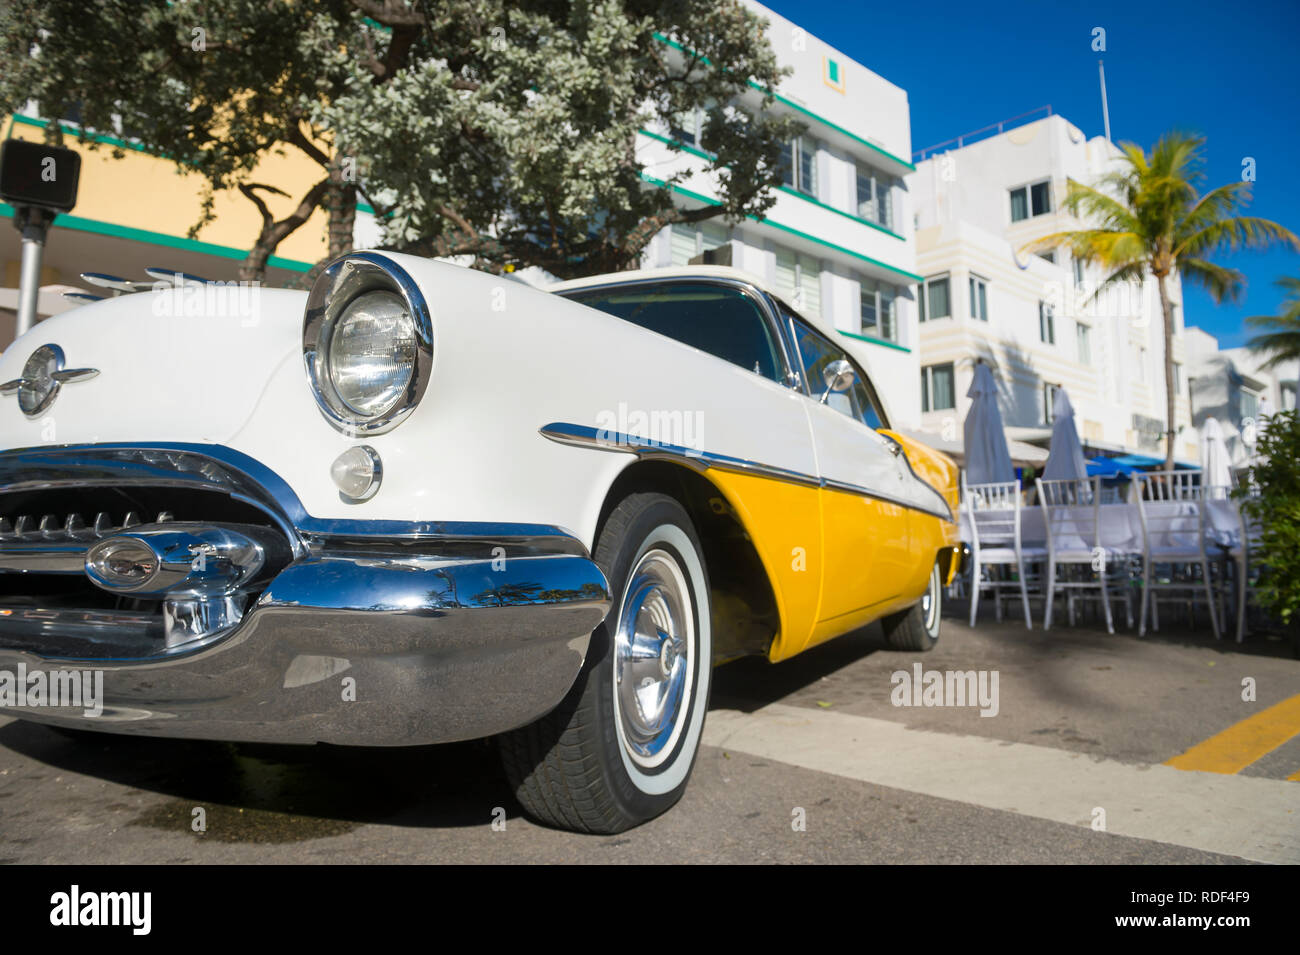 MIAMI - DECEMBER 31, 2018: Bright scenic view of classic American car complementing the Art Deco architecture of Ocean Drive on South Beach. Stock Photo